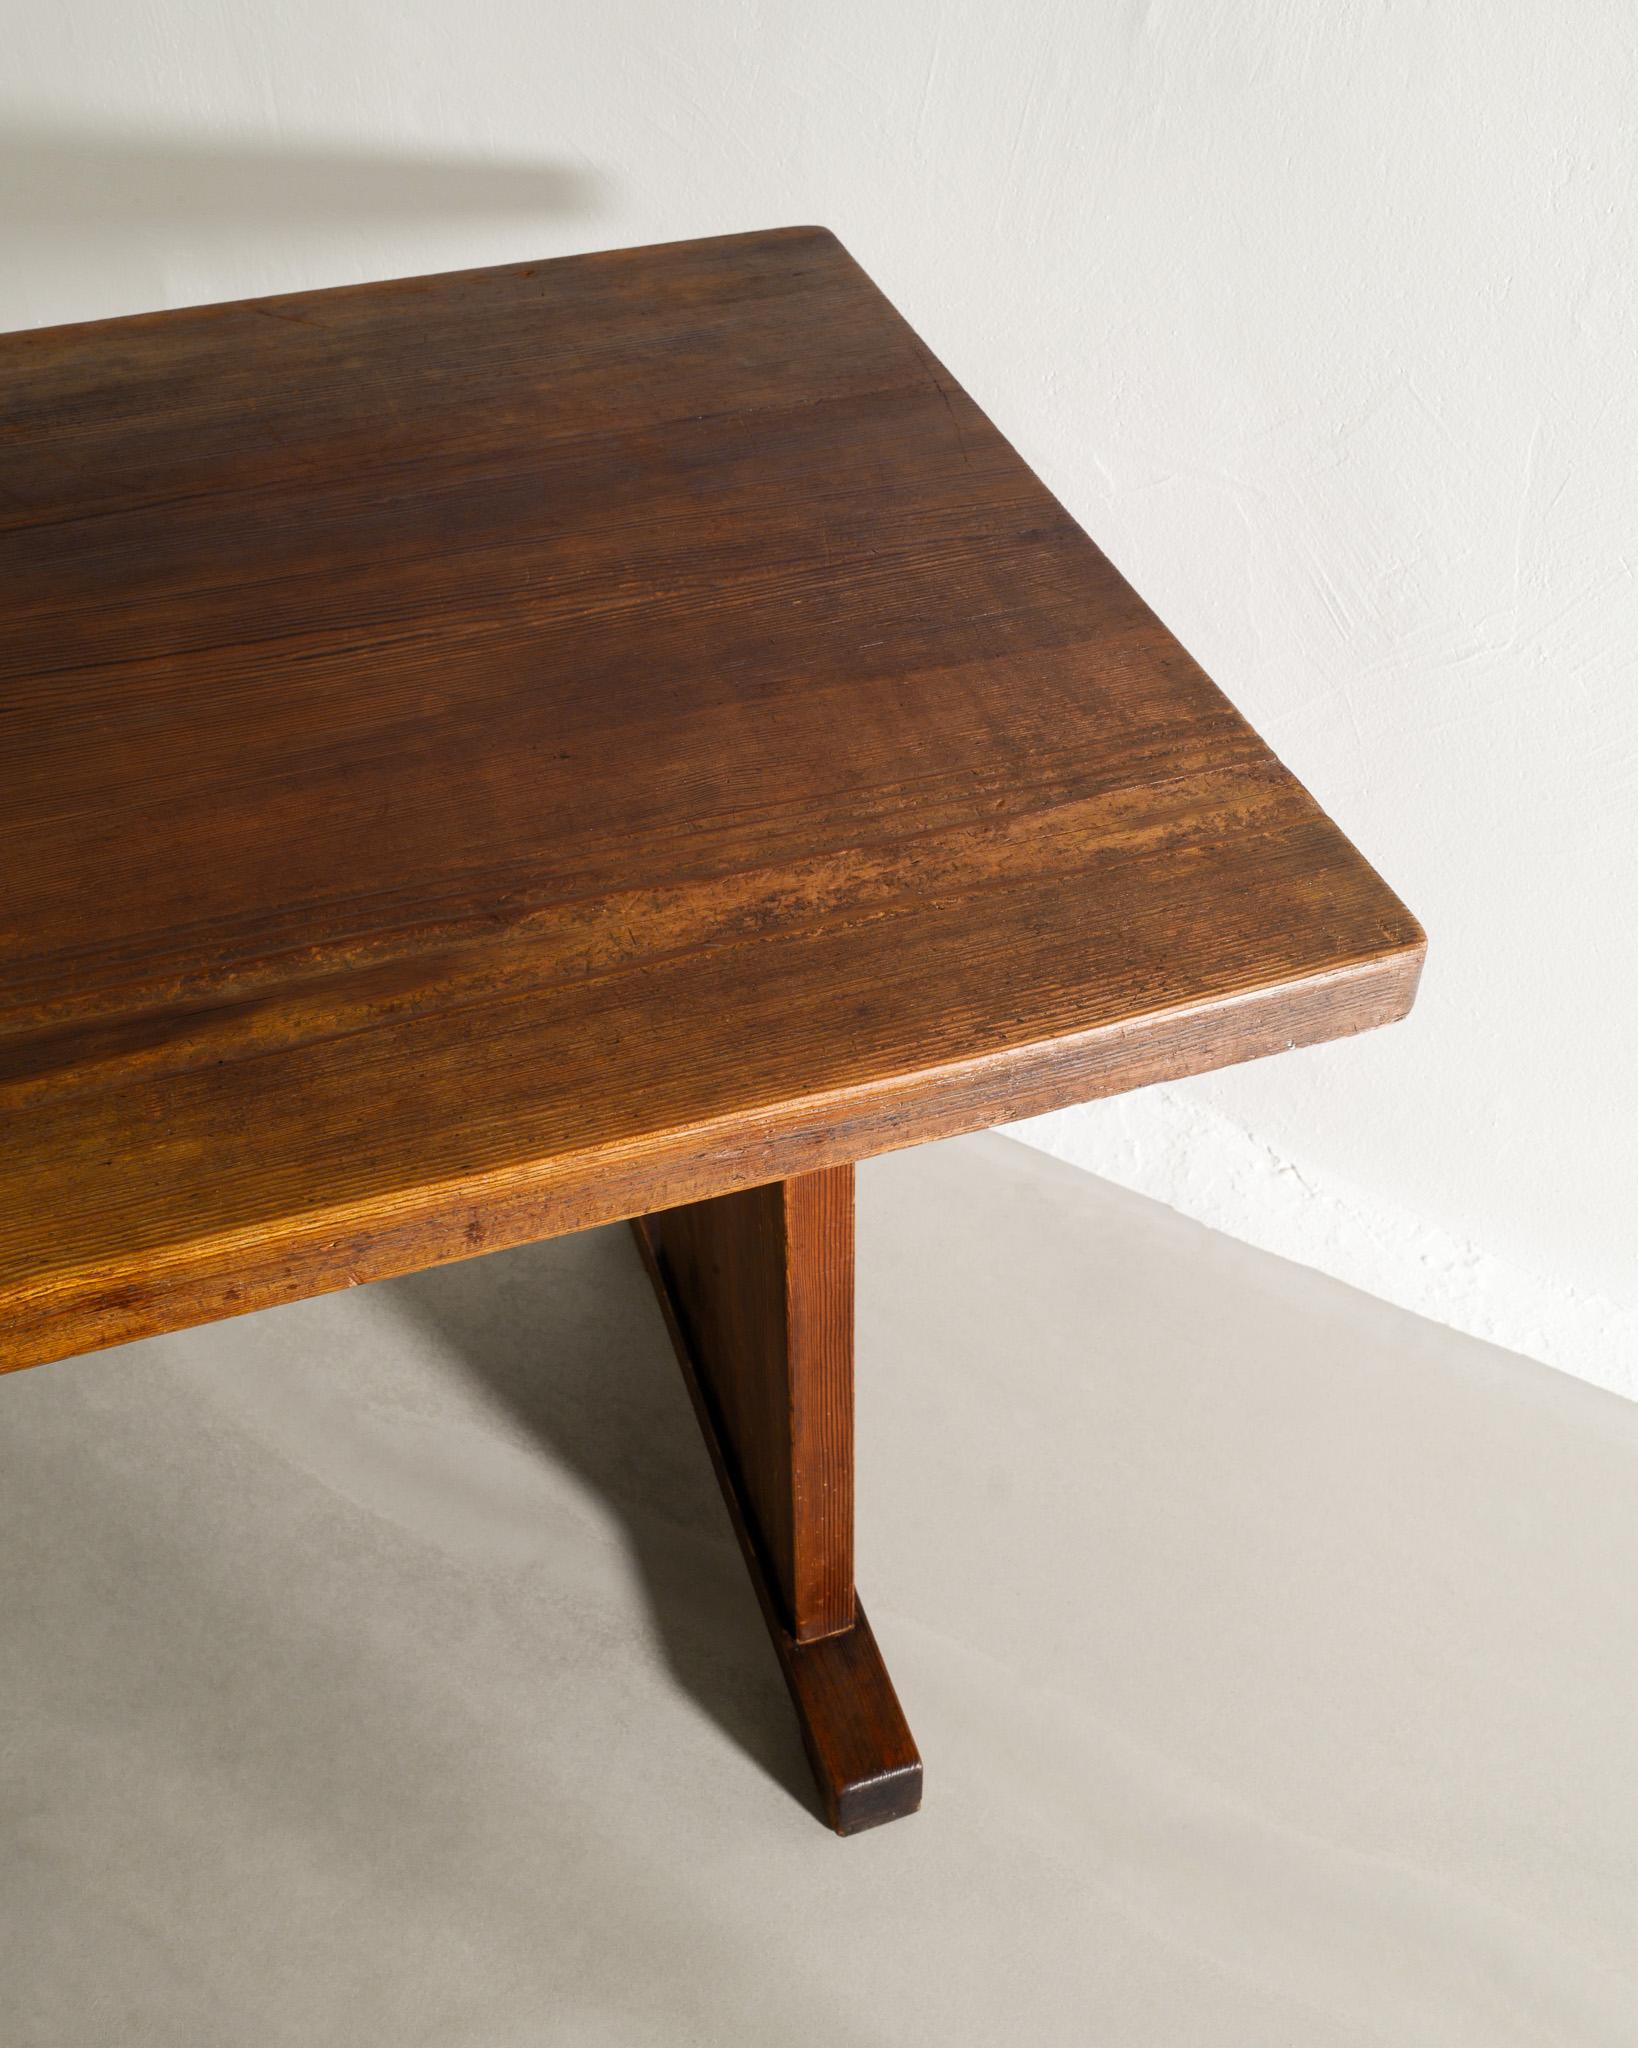 Swedish Pine Table / Desk in style of Axel Einar Hjorth Produced in Sweden 1930s For Sale 3